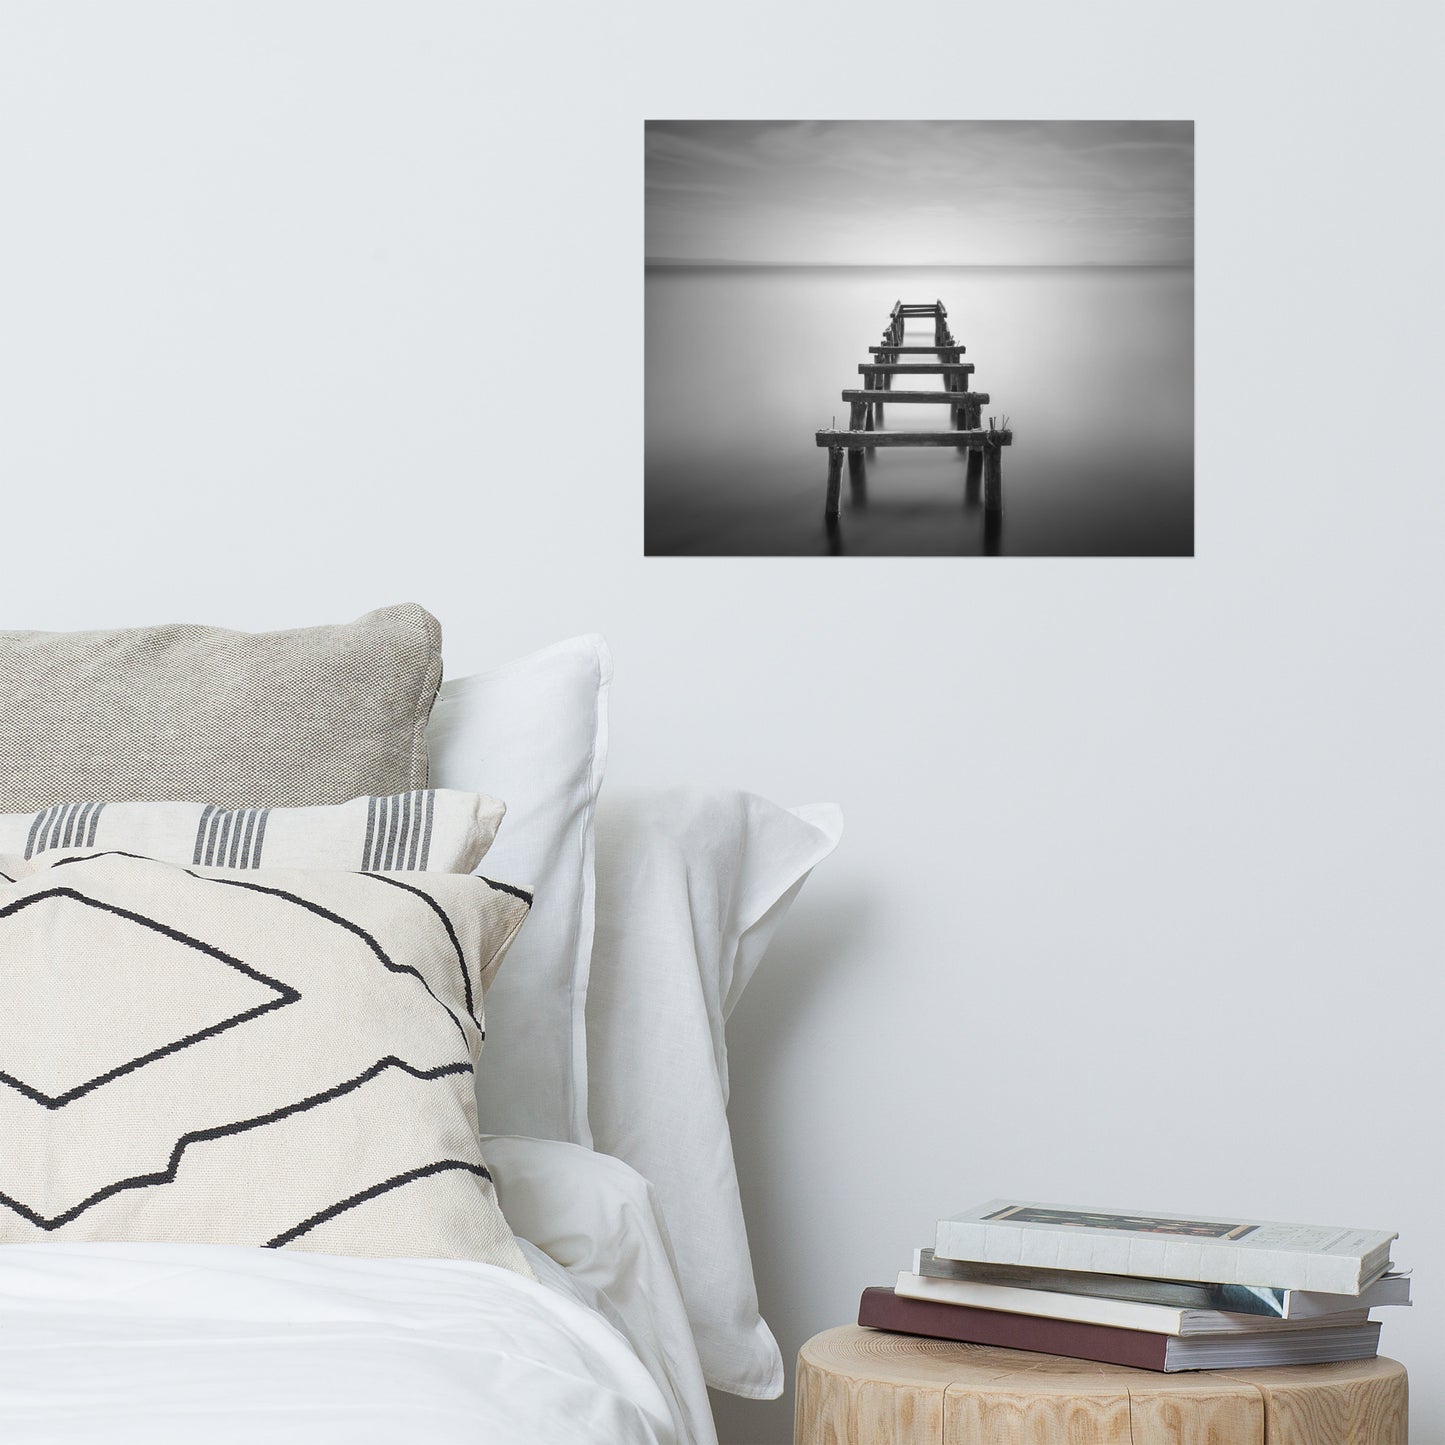 Soft Lake and Abandoned Pier Black and White Landscape Photo Loose Wall Art Prints